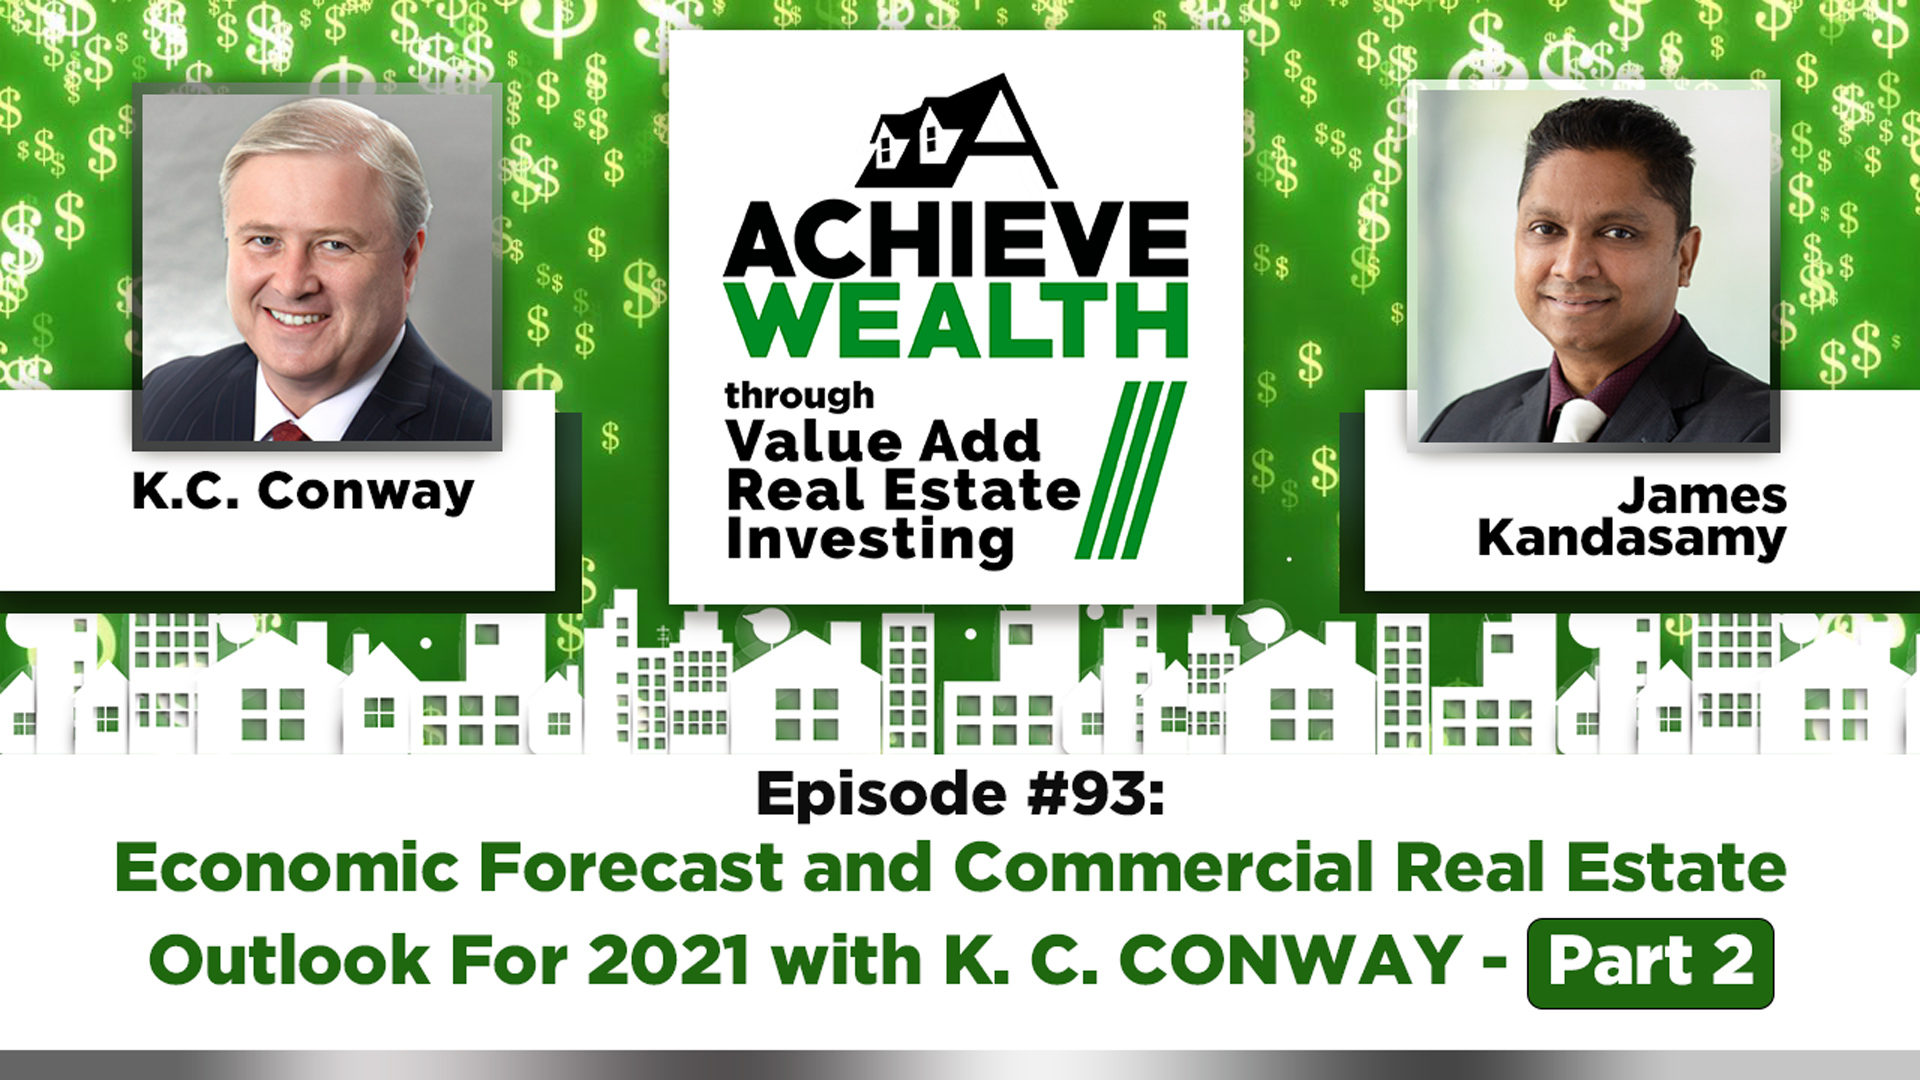 Ep#92 Economic Forecast and Commercial Real Estate Outlook For 2021 with K. C. CONWAY - Part 2 File nam